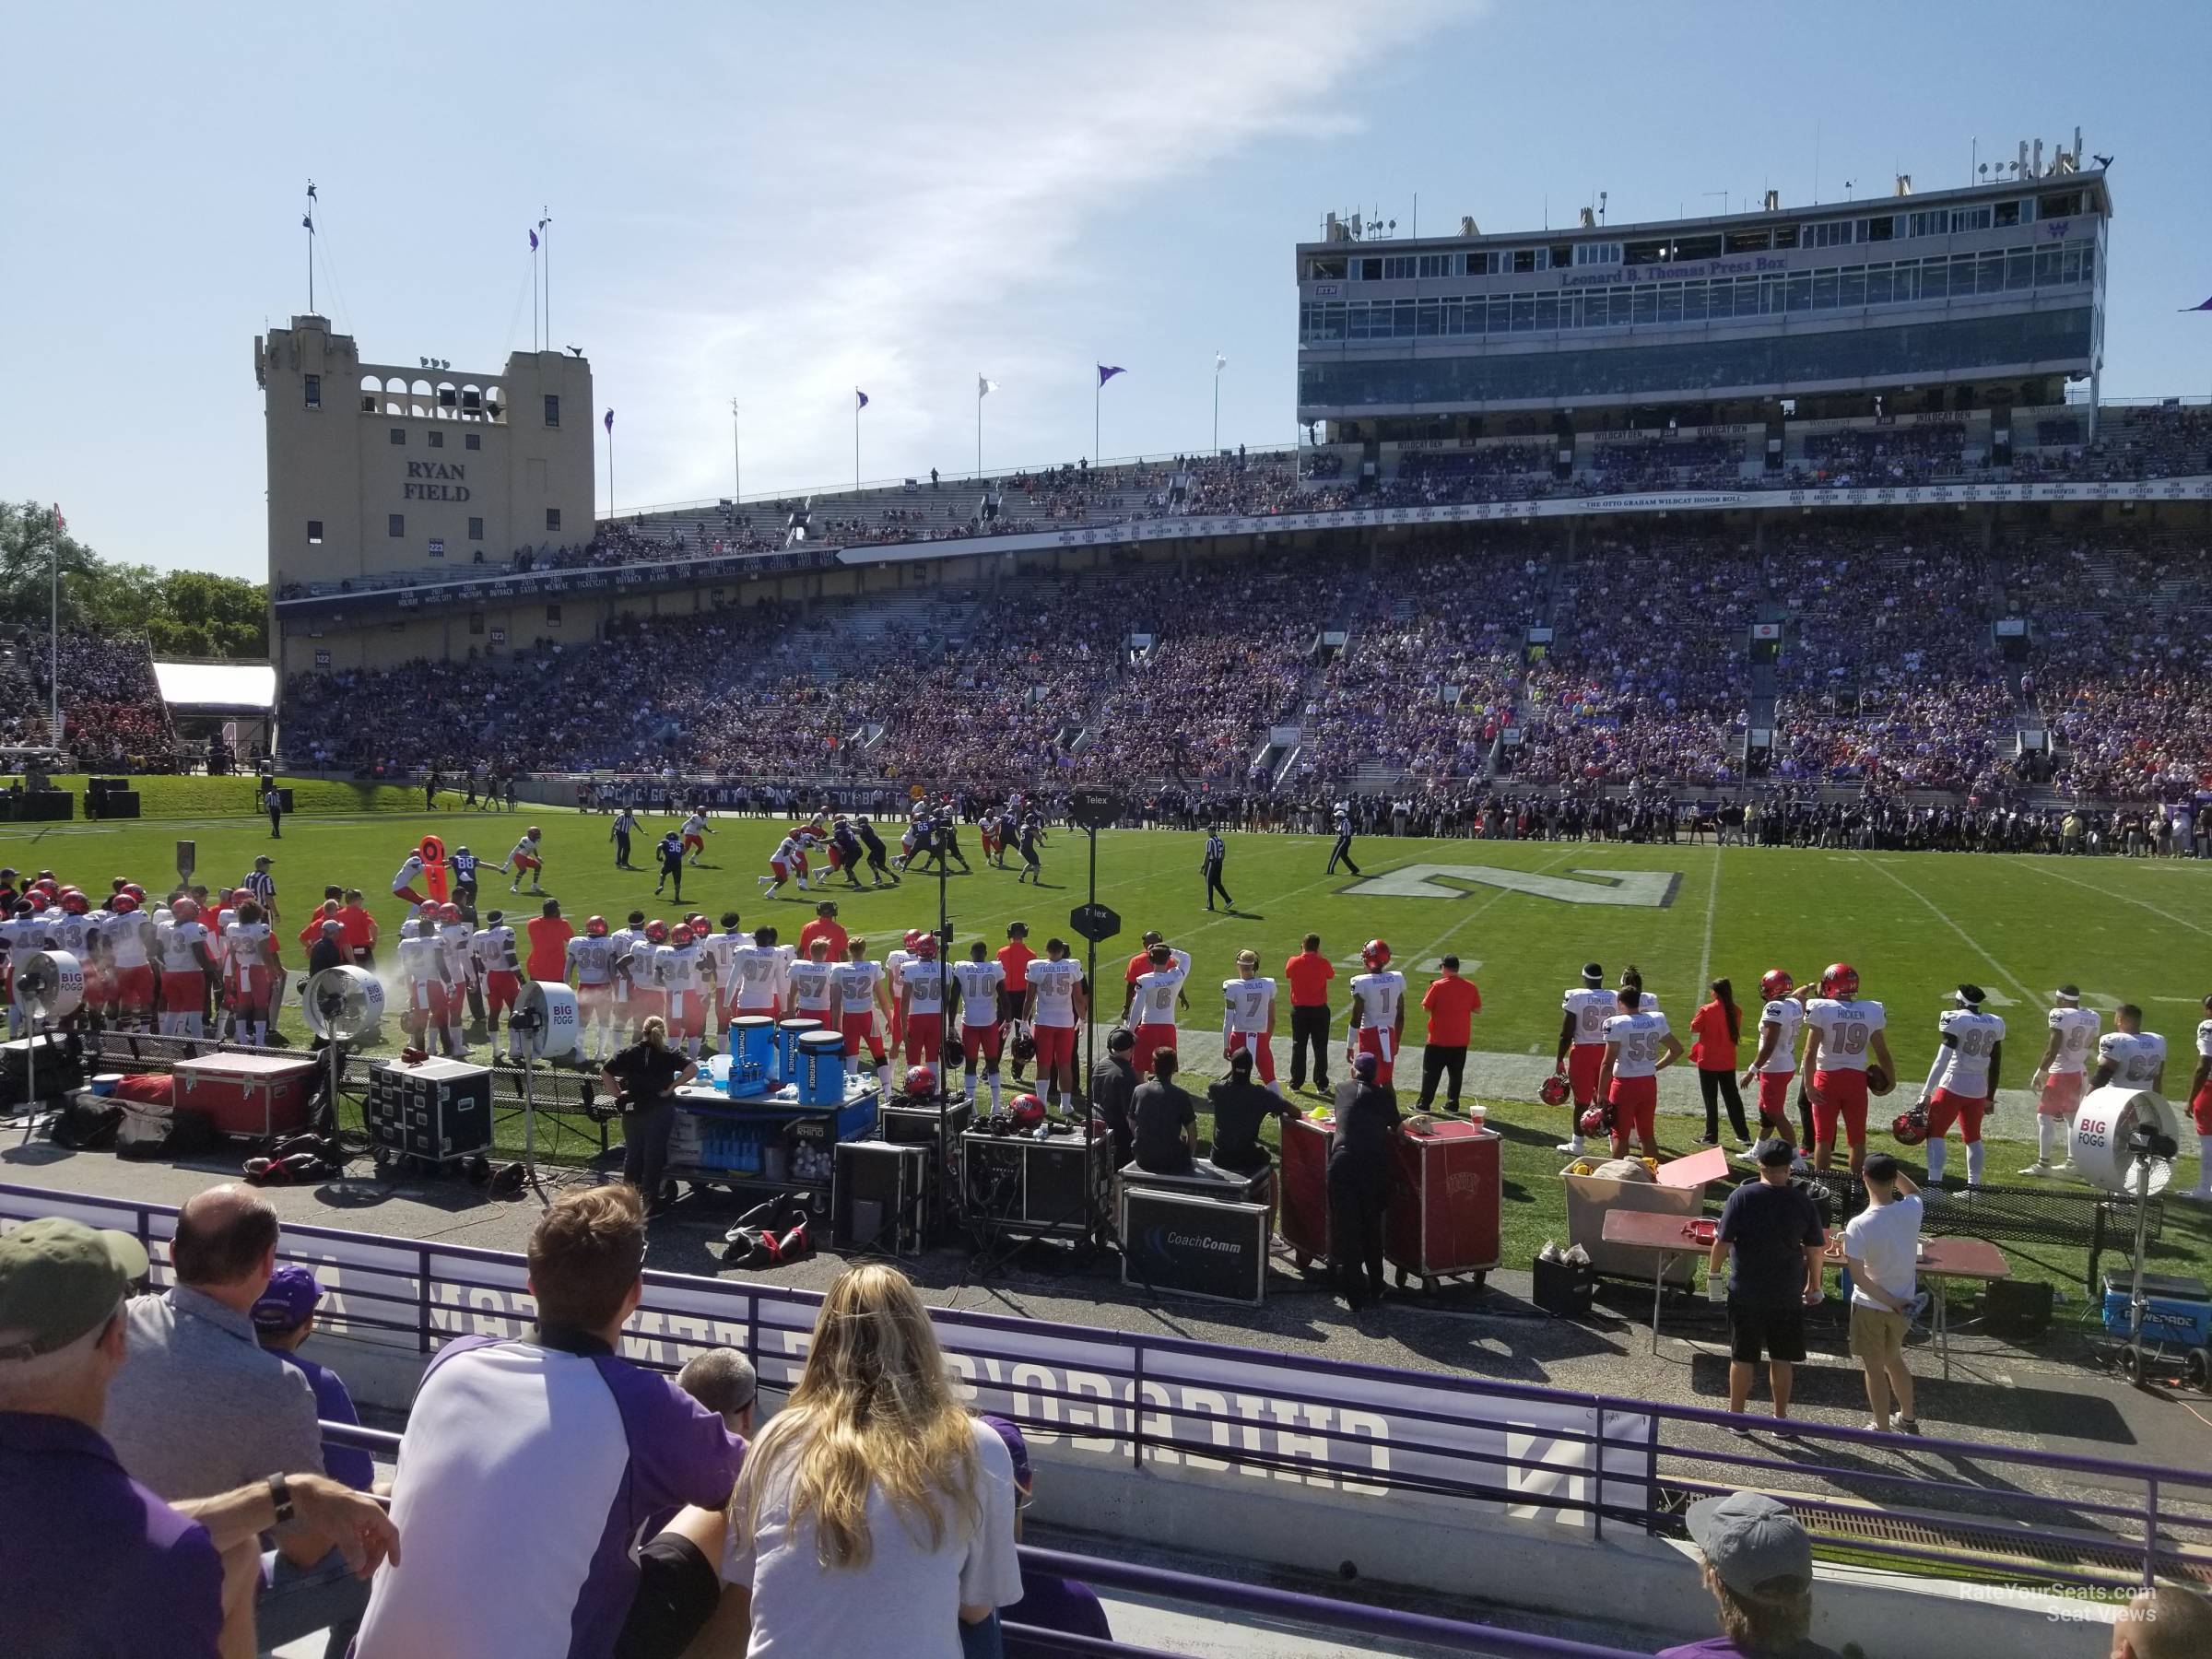 section 108, row 8 seat view  - ryan field